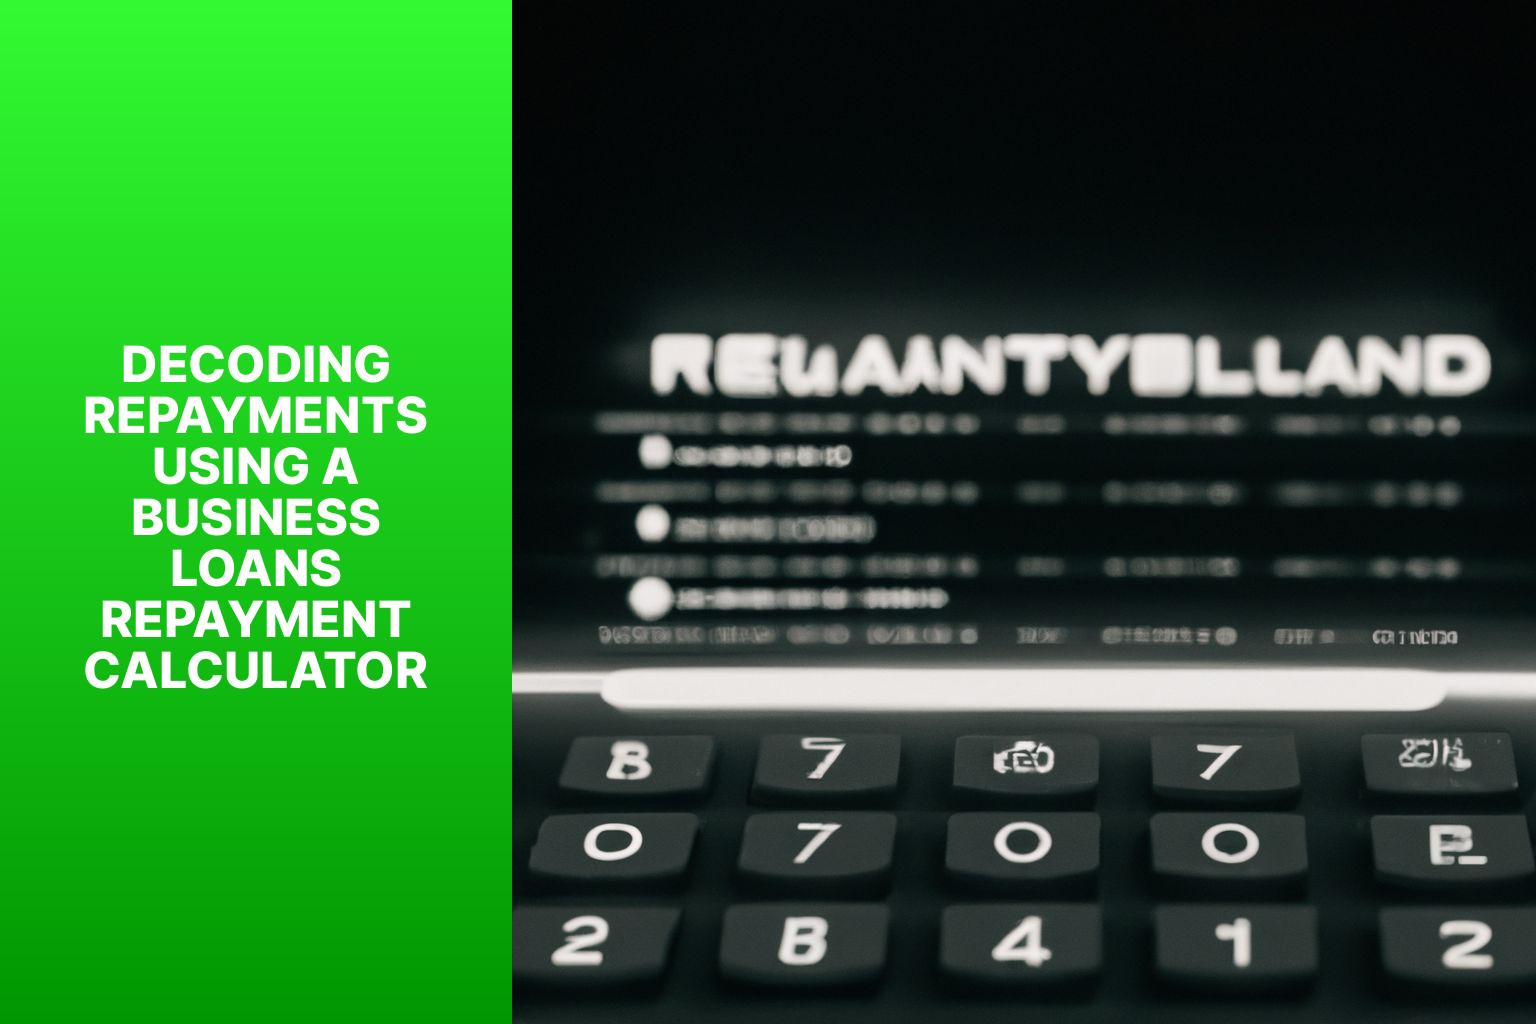 Decoding Repayments Using a Business Loans Repayment Calculator